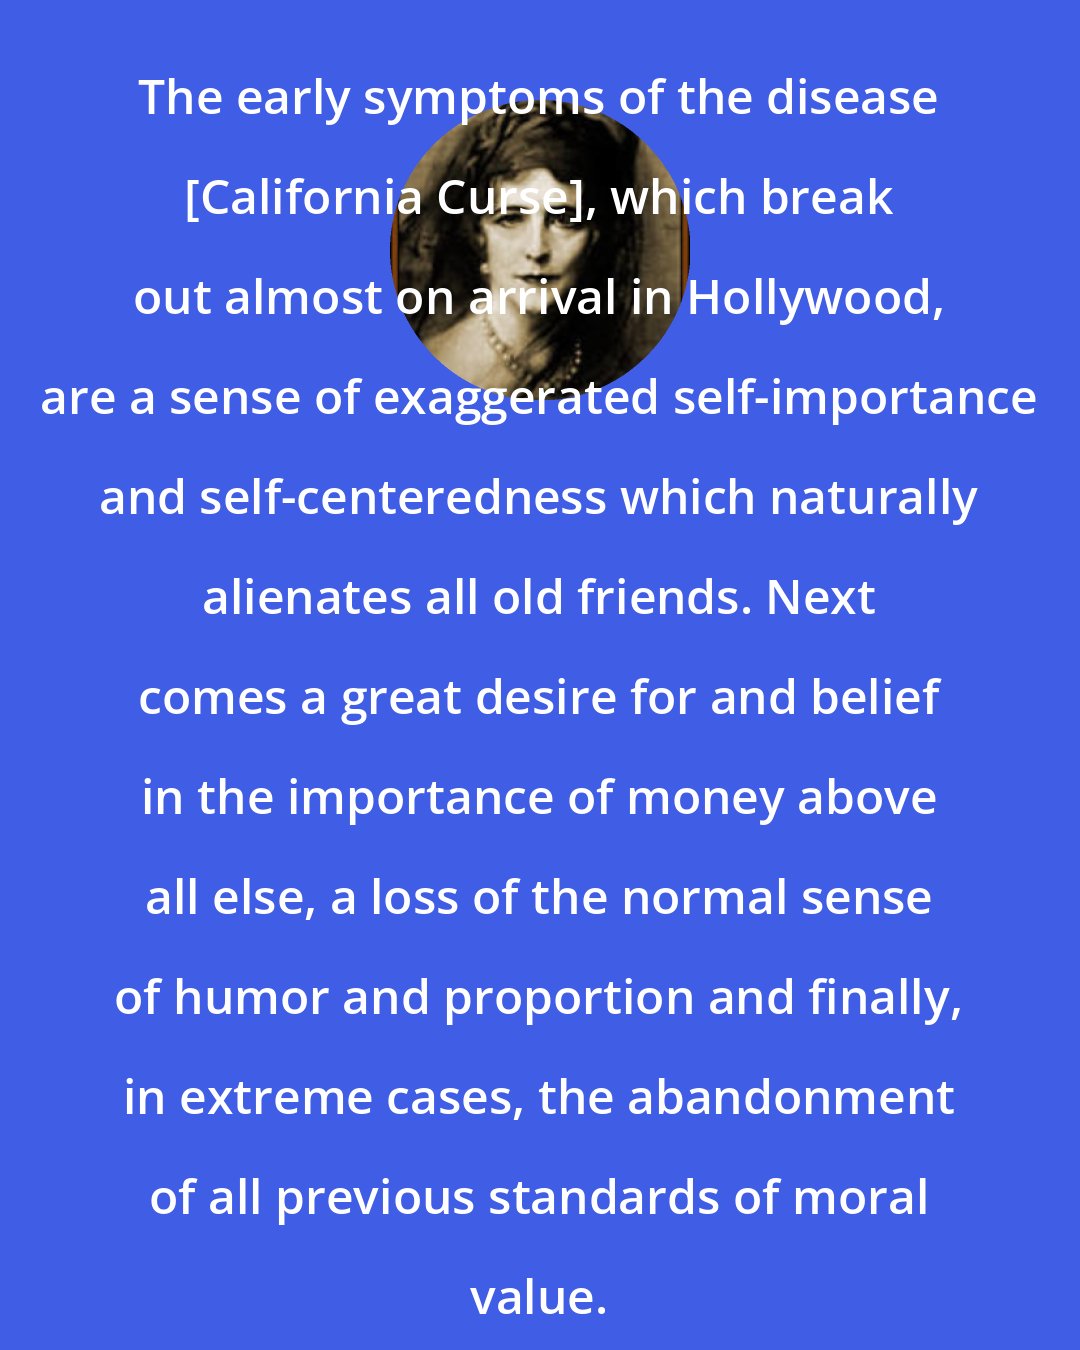 Elinor Glyn: The early symptoms of the disease [California Curse], which break out almost on arrival in Hollywood, are a sense of exaggerated self-importance and self-centeredness which naturally alienates all old friends. Next comes a great desire for and belief in the importance of money above all else, a loss of the normal sense of humor and proportion and finally, in extreme cases, the abandonment of all previous standards of moral value.